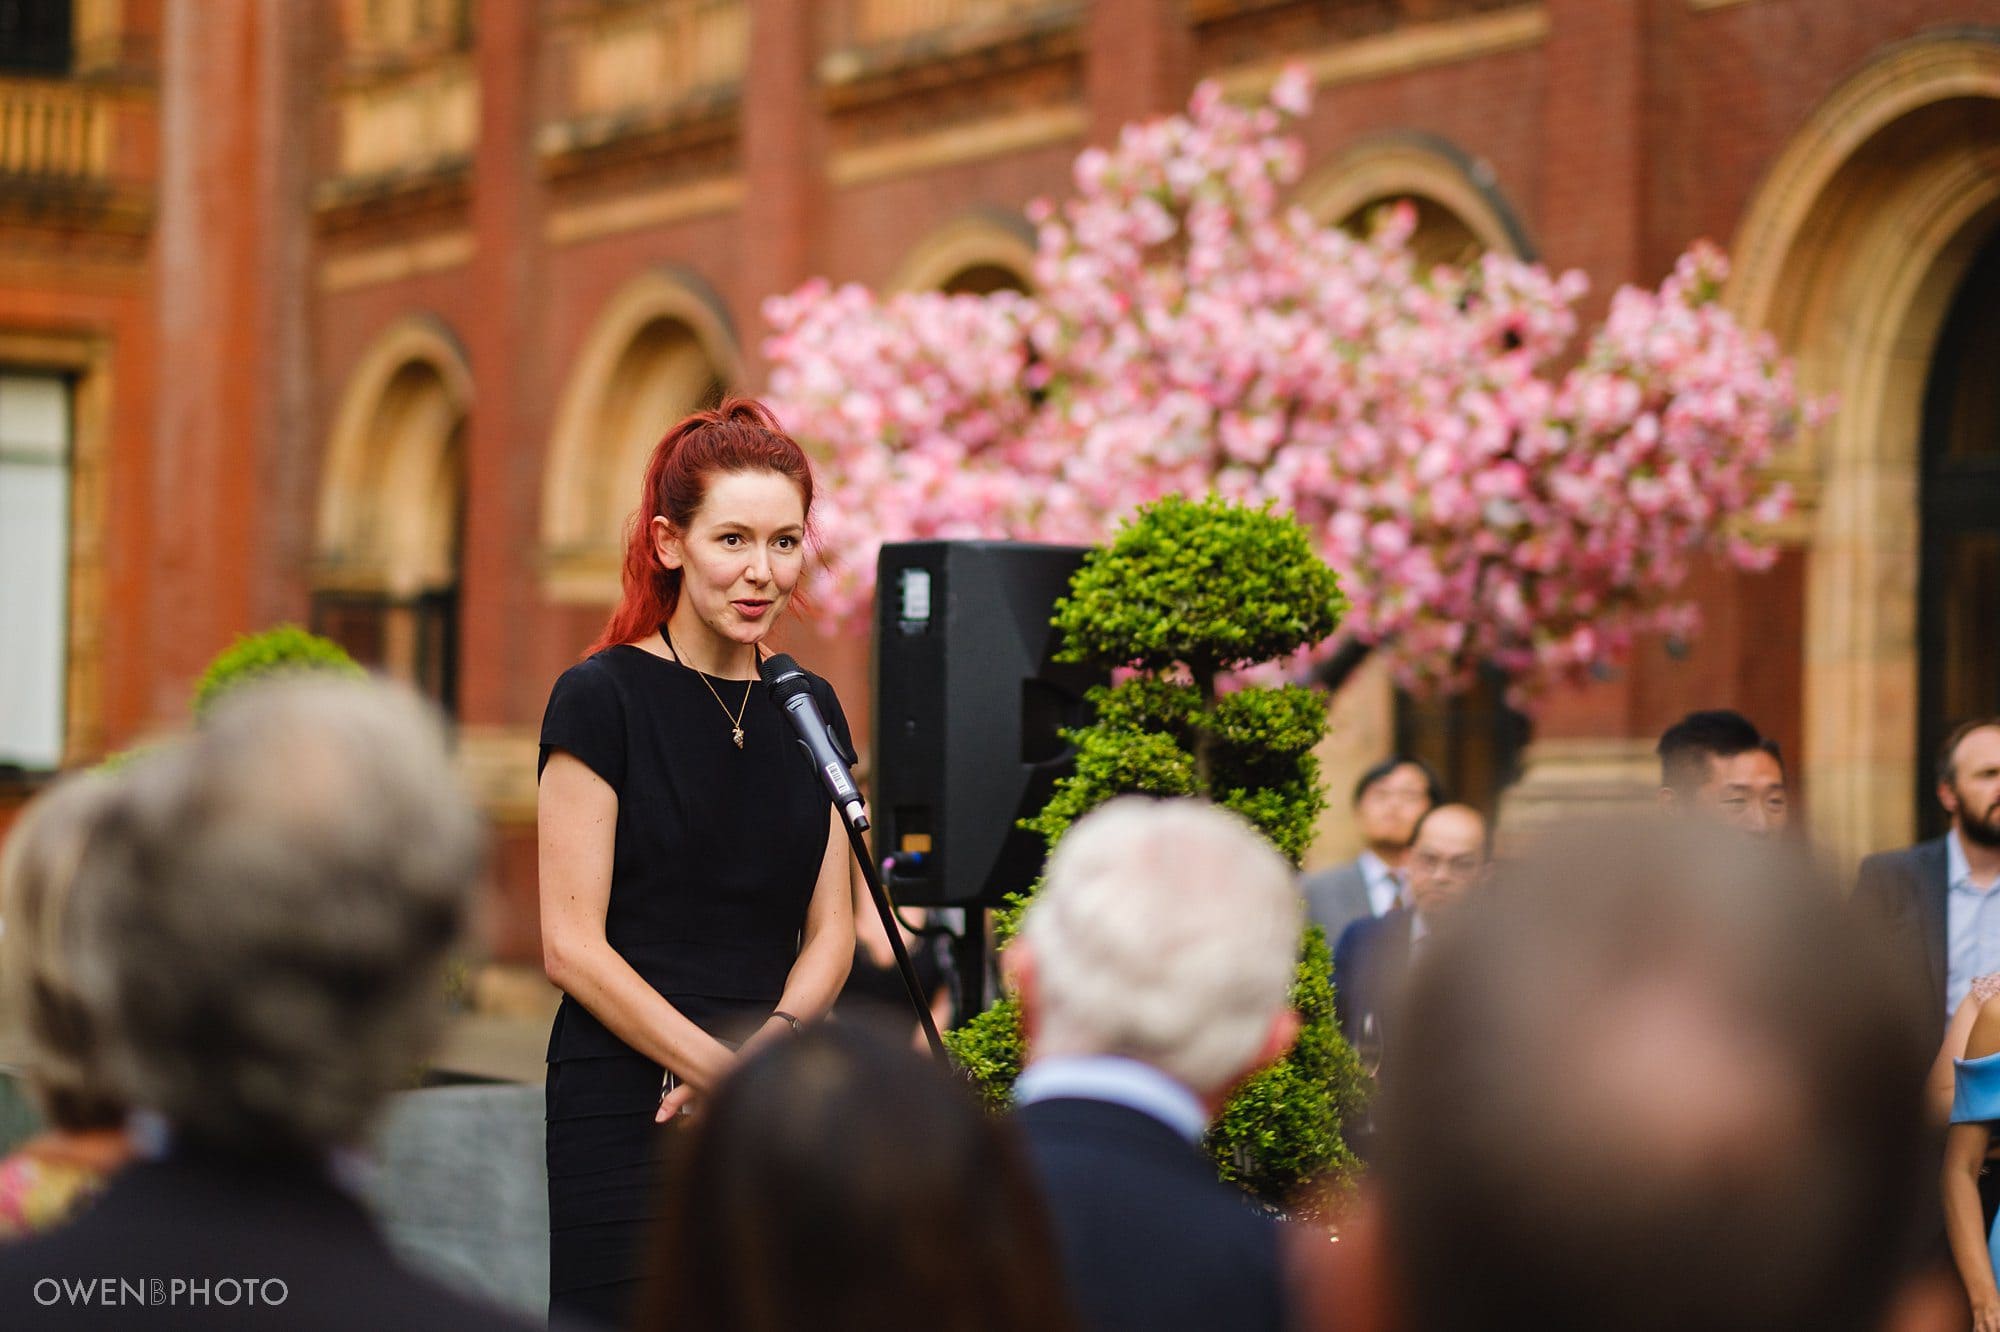 victoria albert event photographer london 035 - Summer party at the V&A Museum